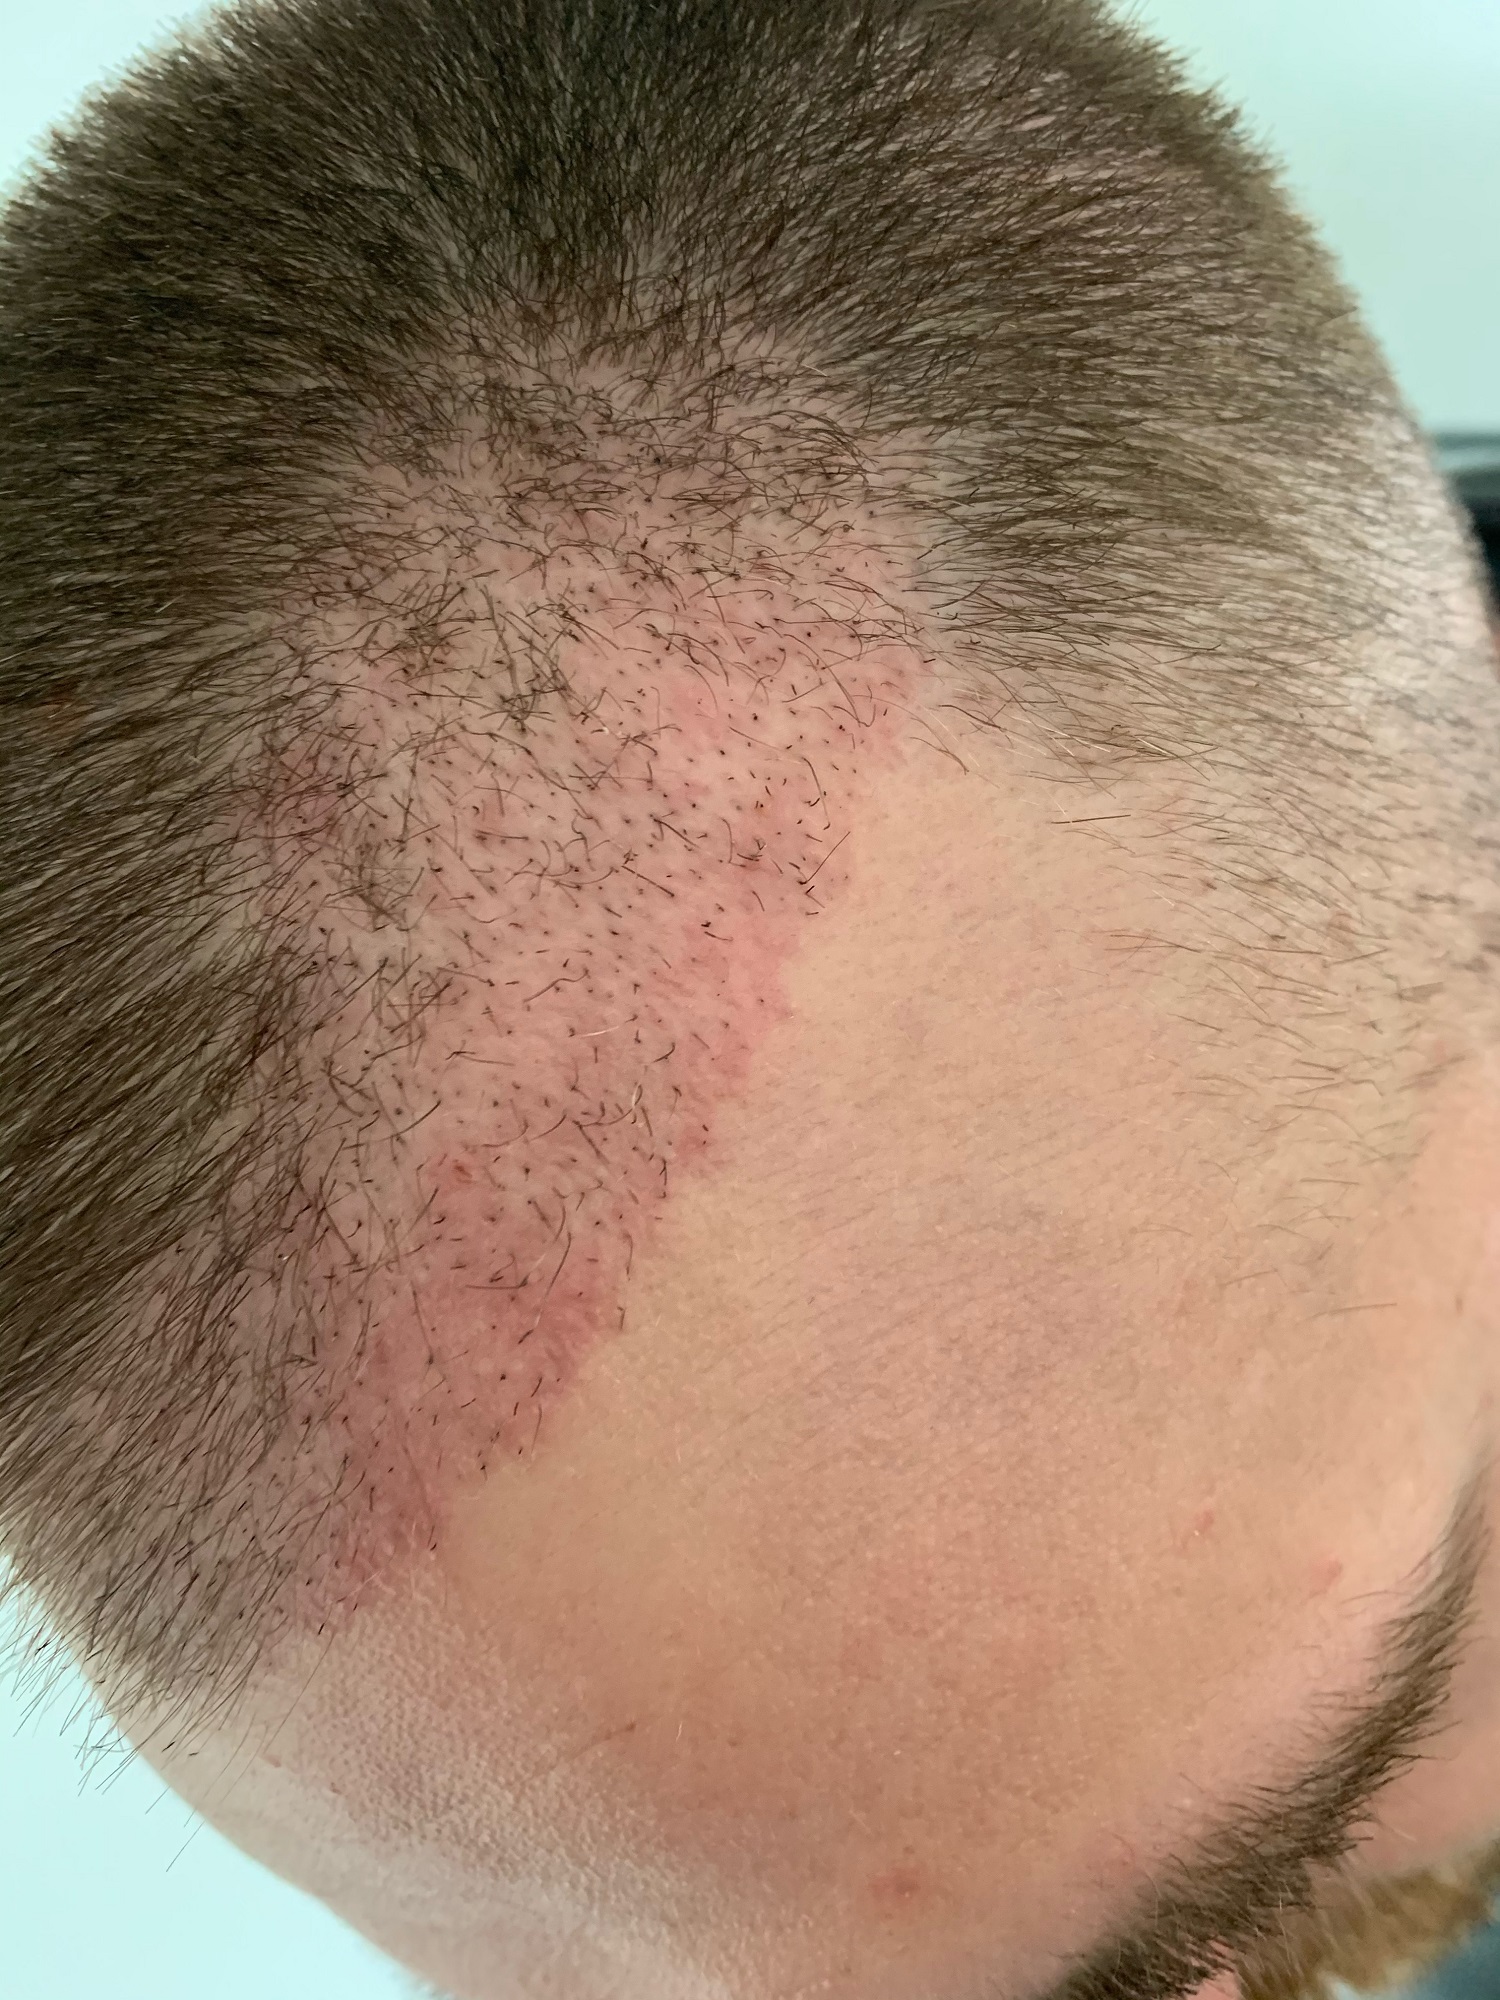 Hair Transplant: When Does Redness Go Away?